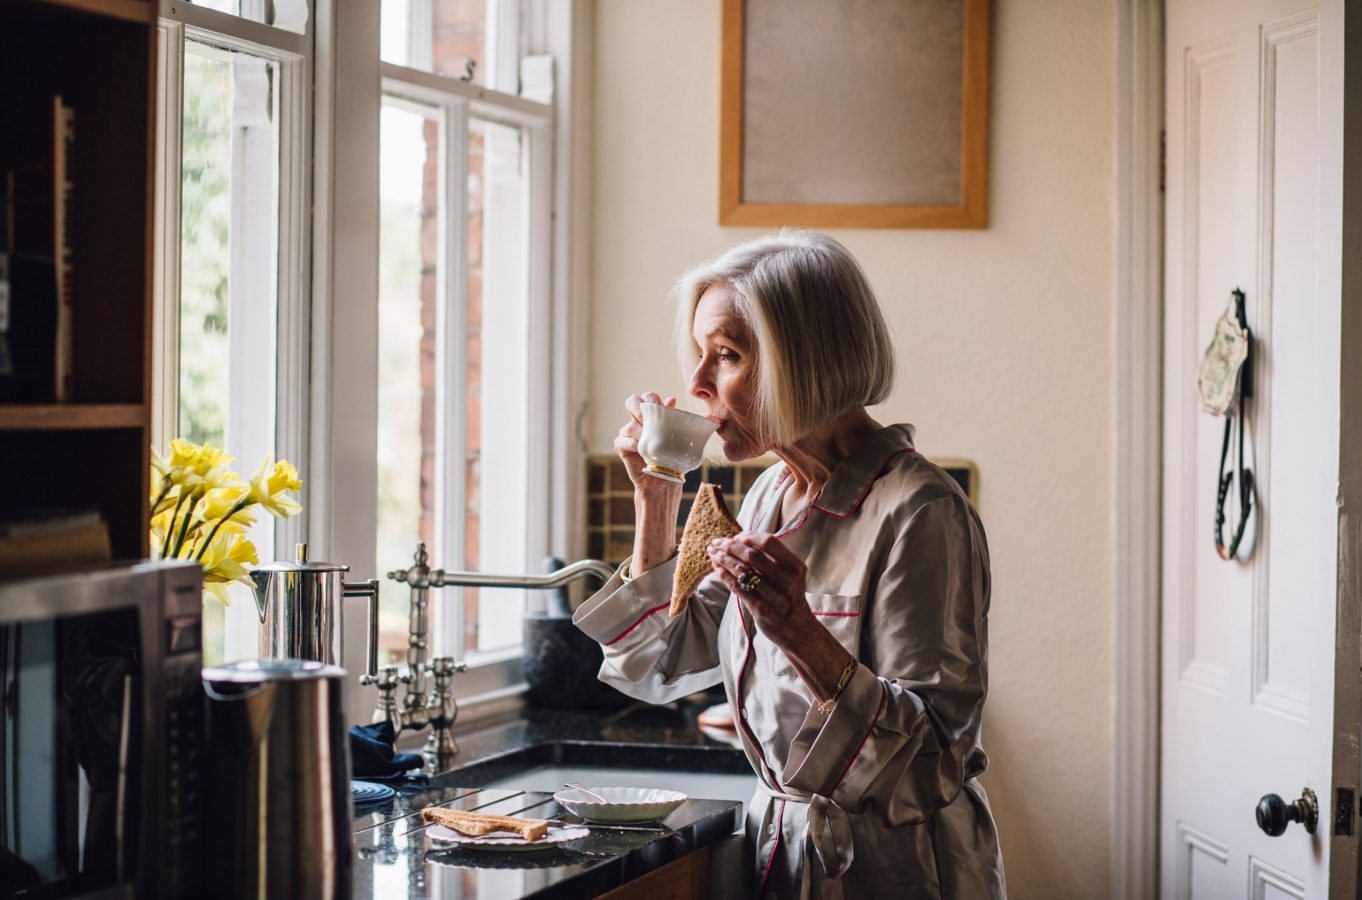 Retired woman drinking coffee alone in the morning in the kitchen wondering what to do with her time.